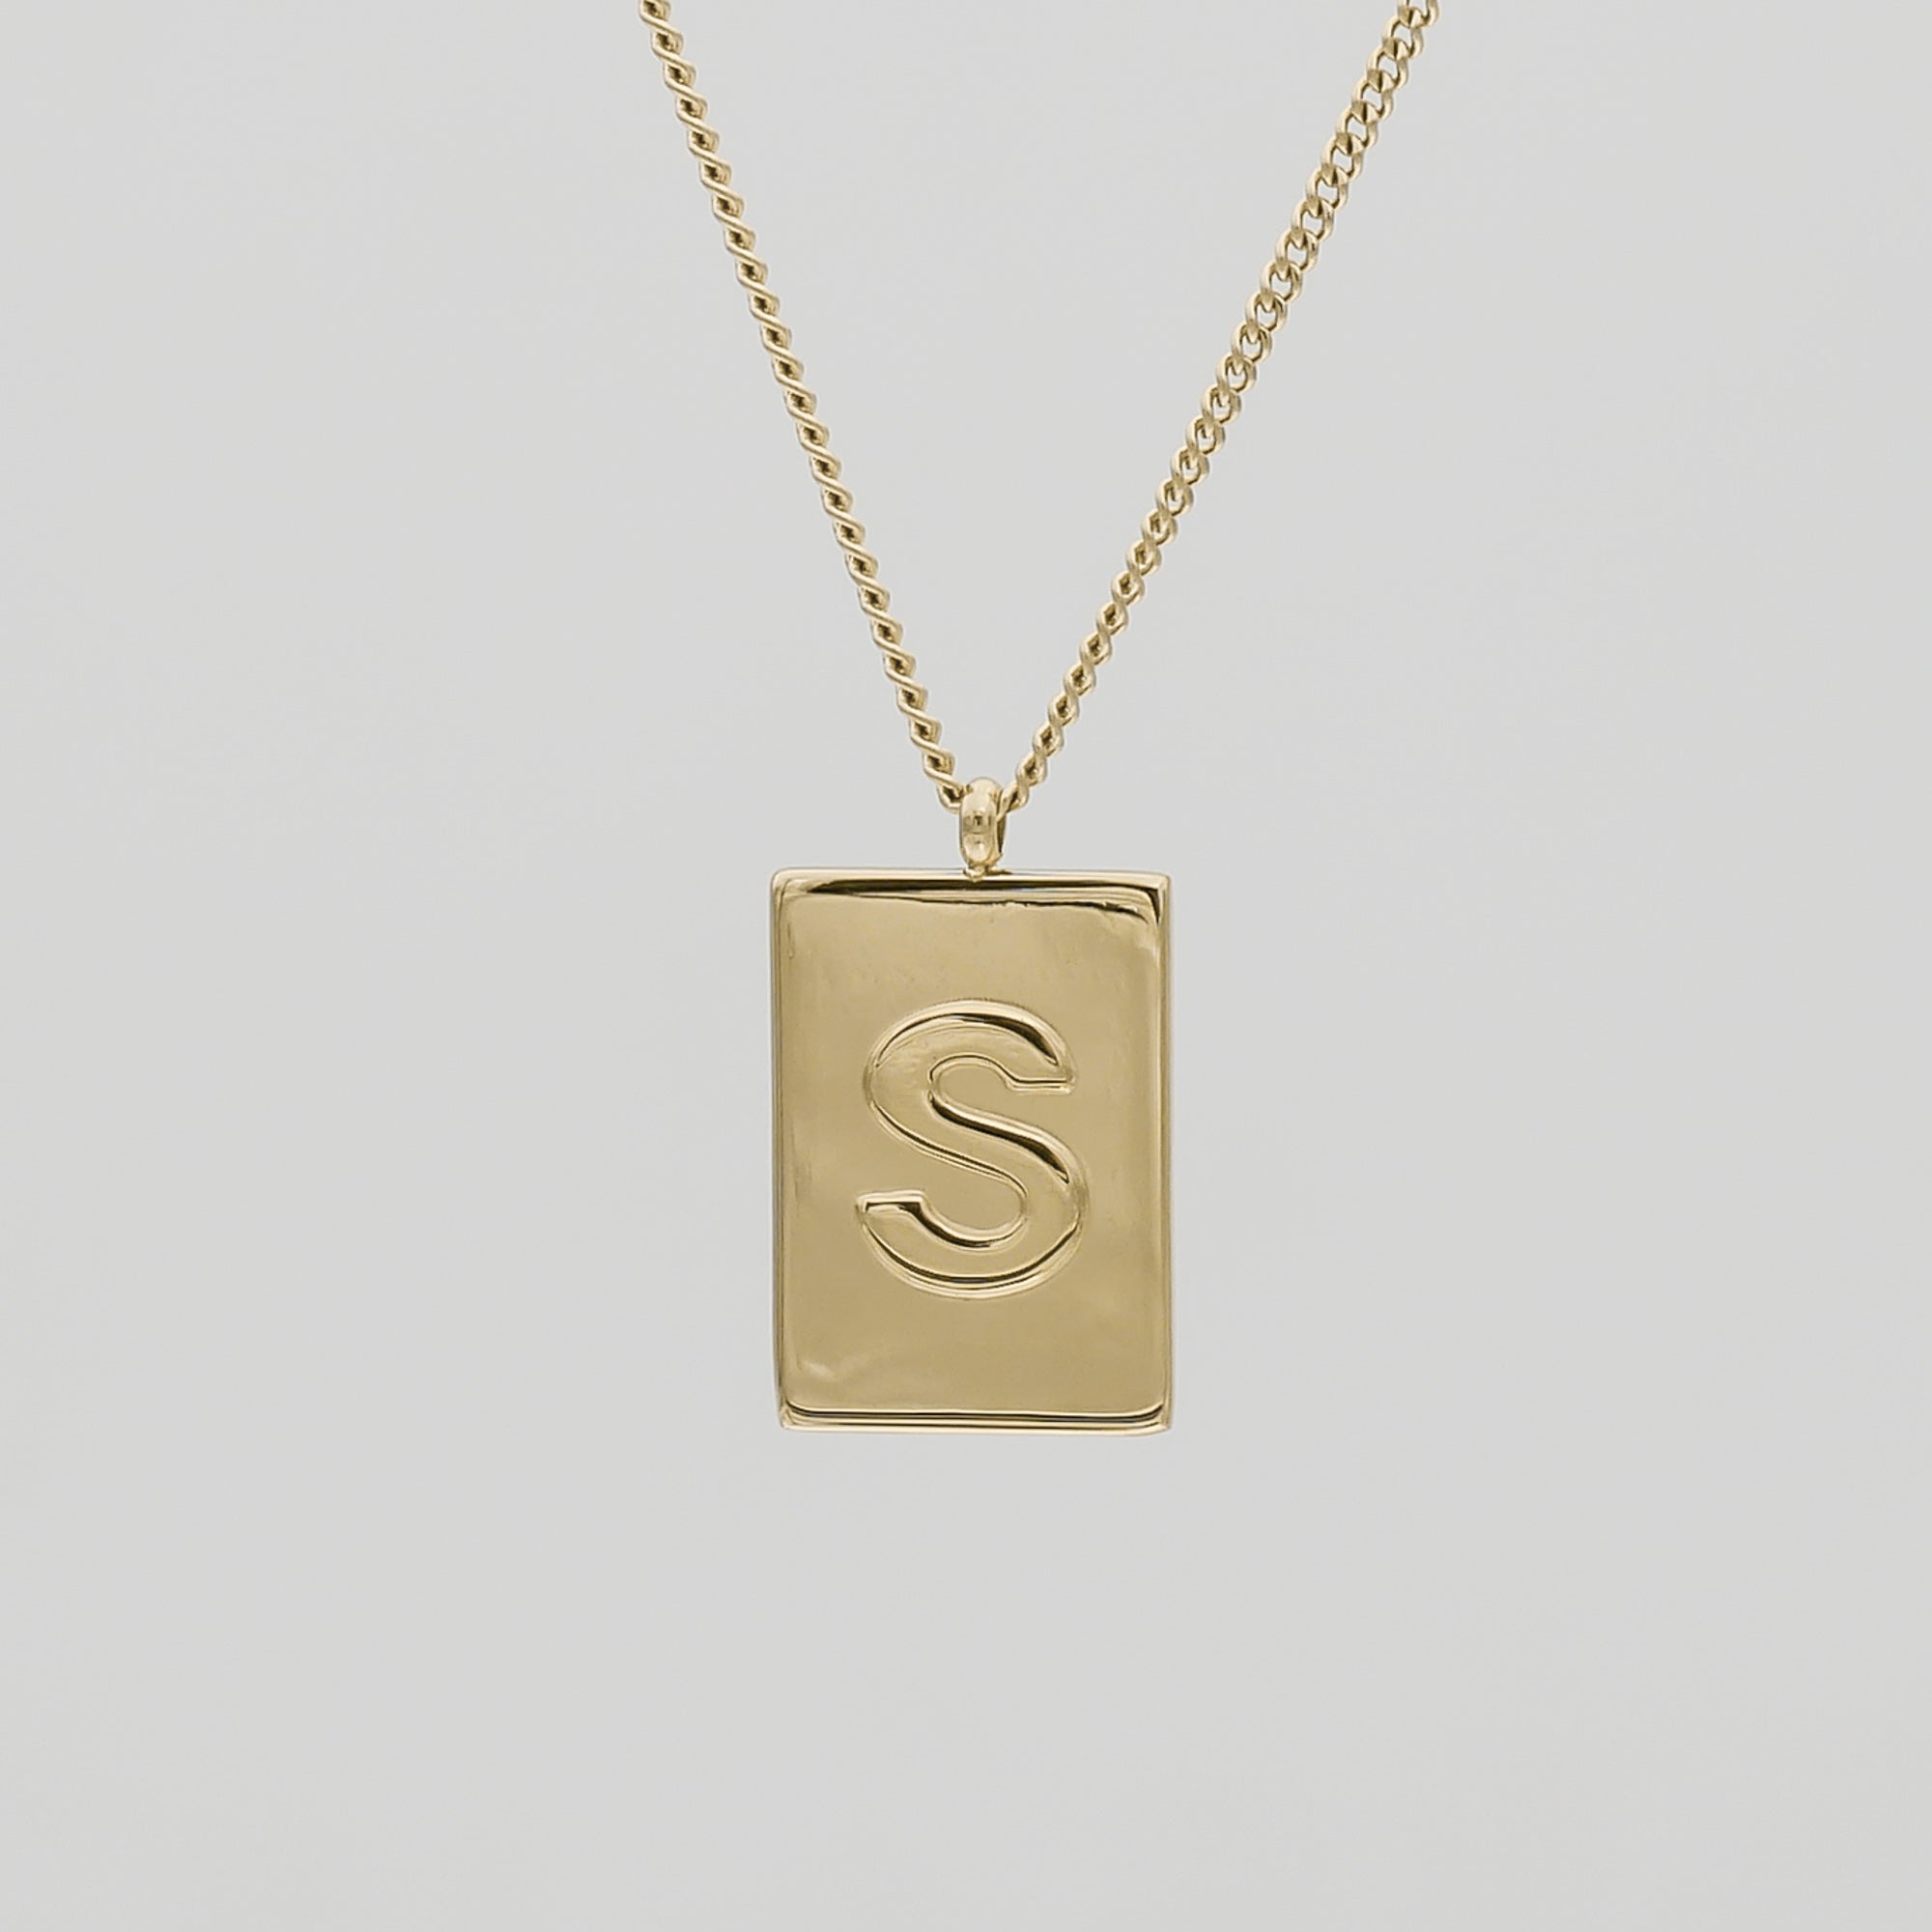 Athena custom initial Gold pendant Necklace, letter S by PRYA